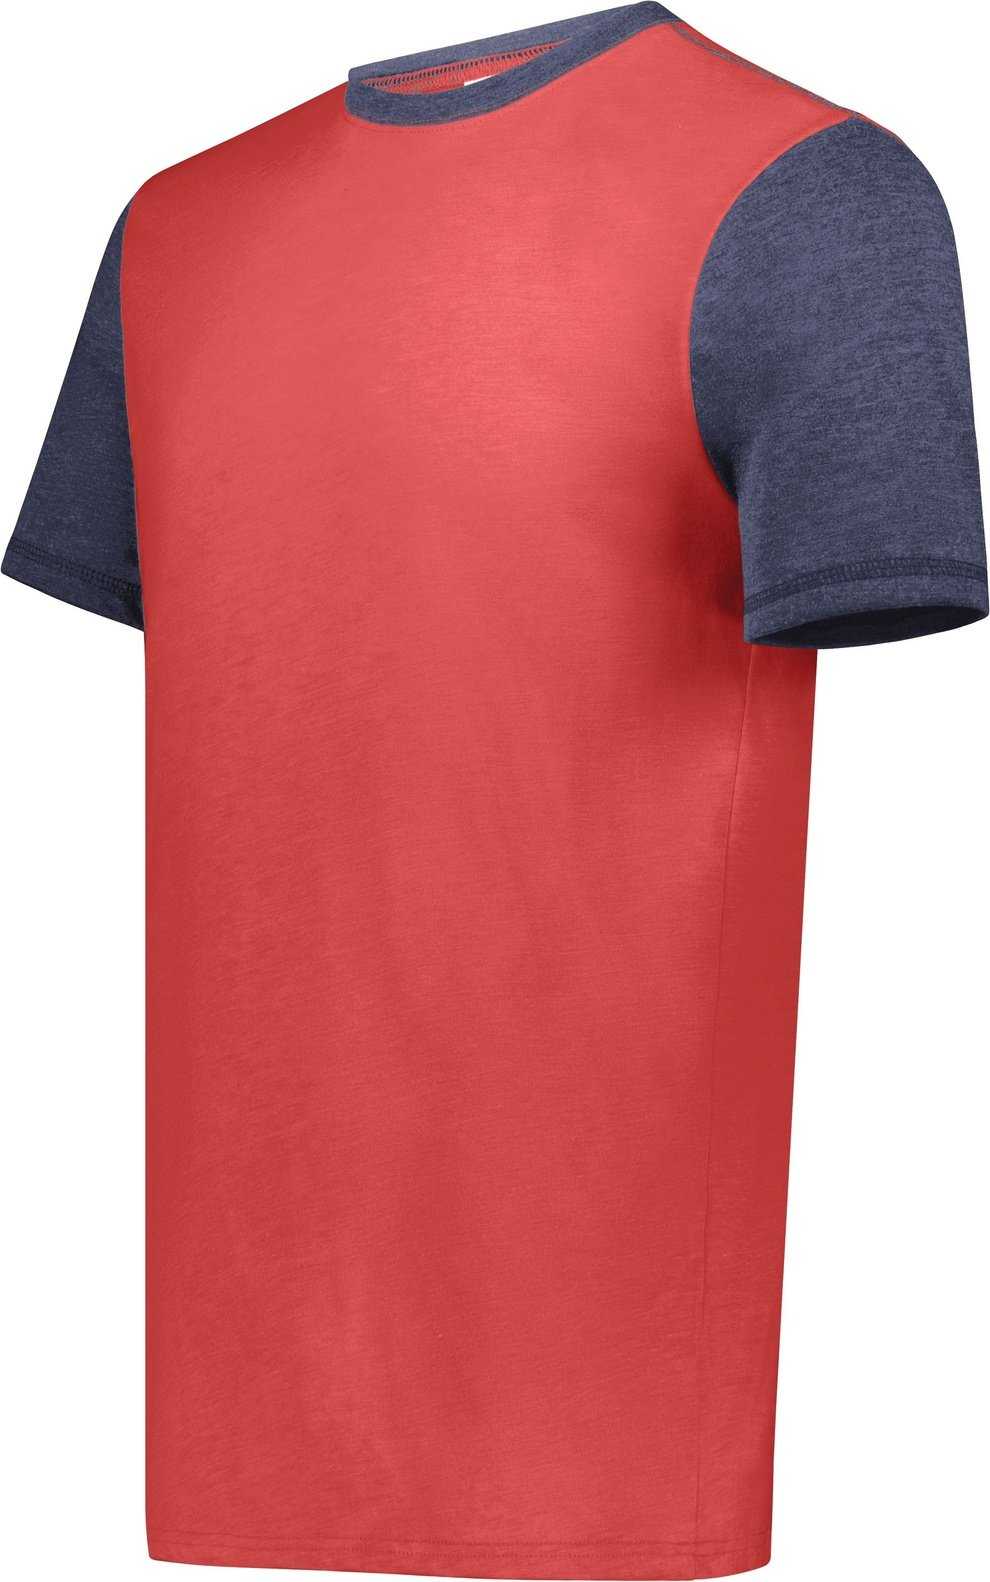 Augusta 6876 Gameday Vintage Ringer Tee - Scarlet Heather Navy Heather - HIT a Double